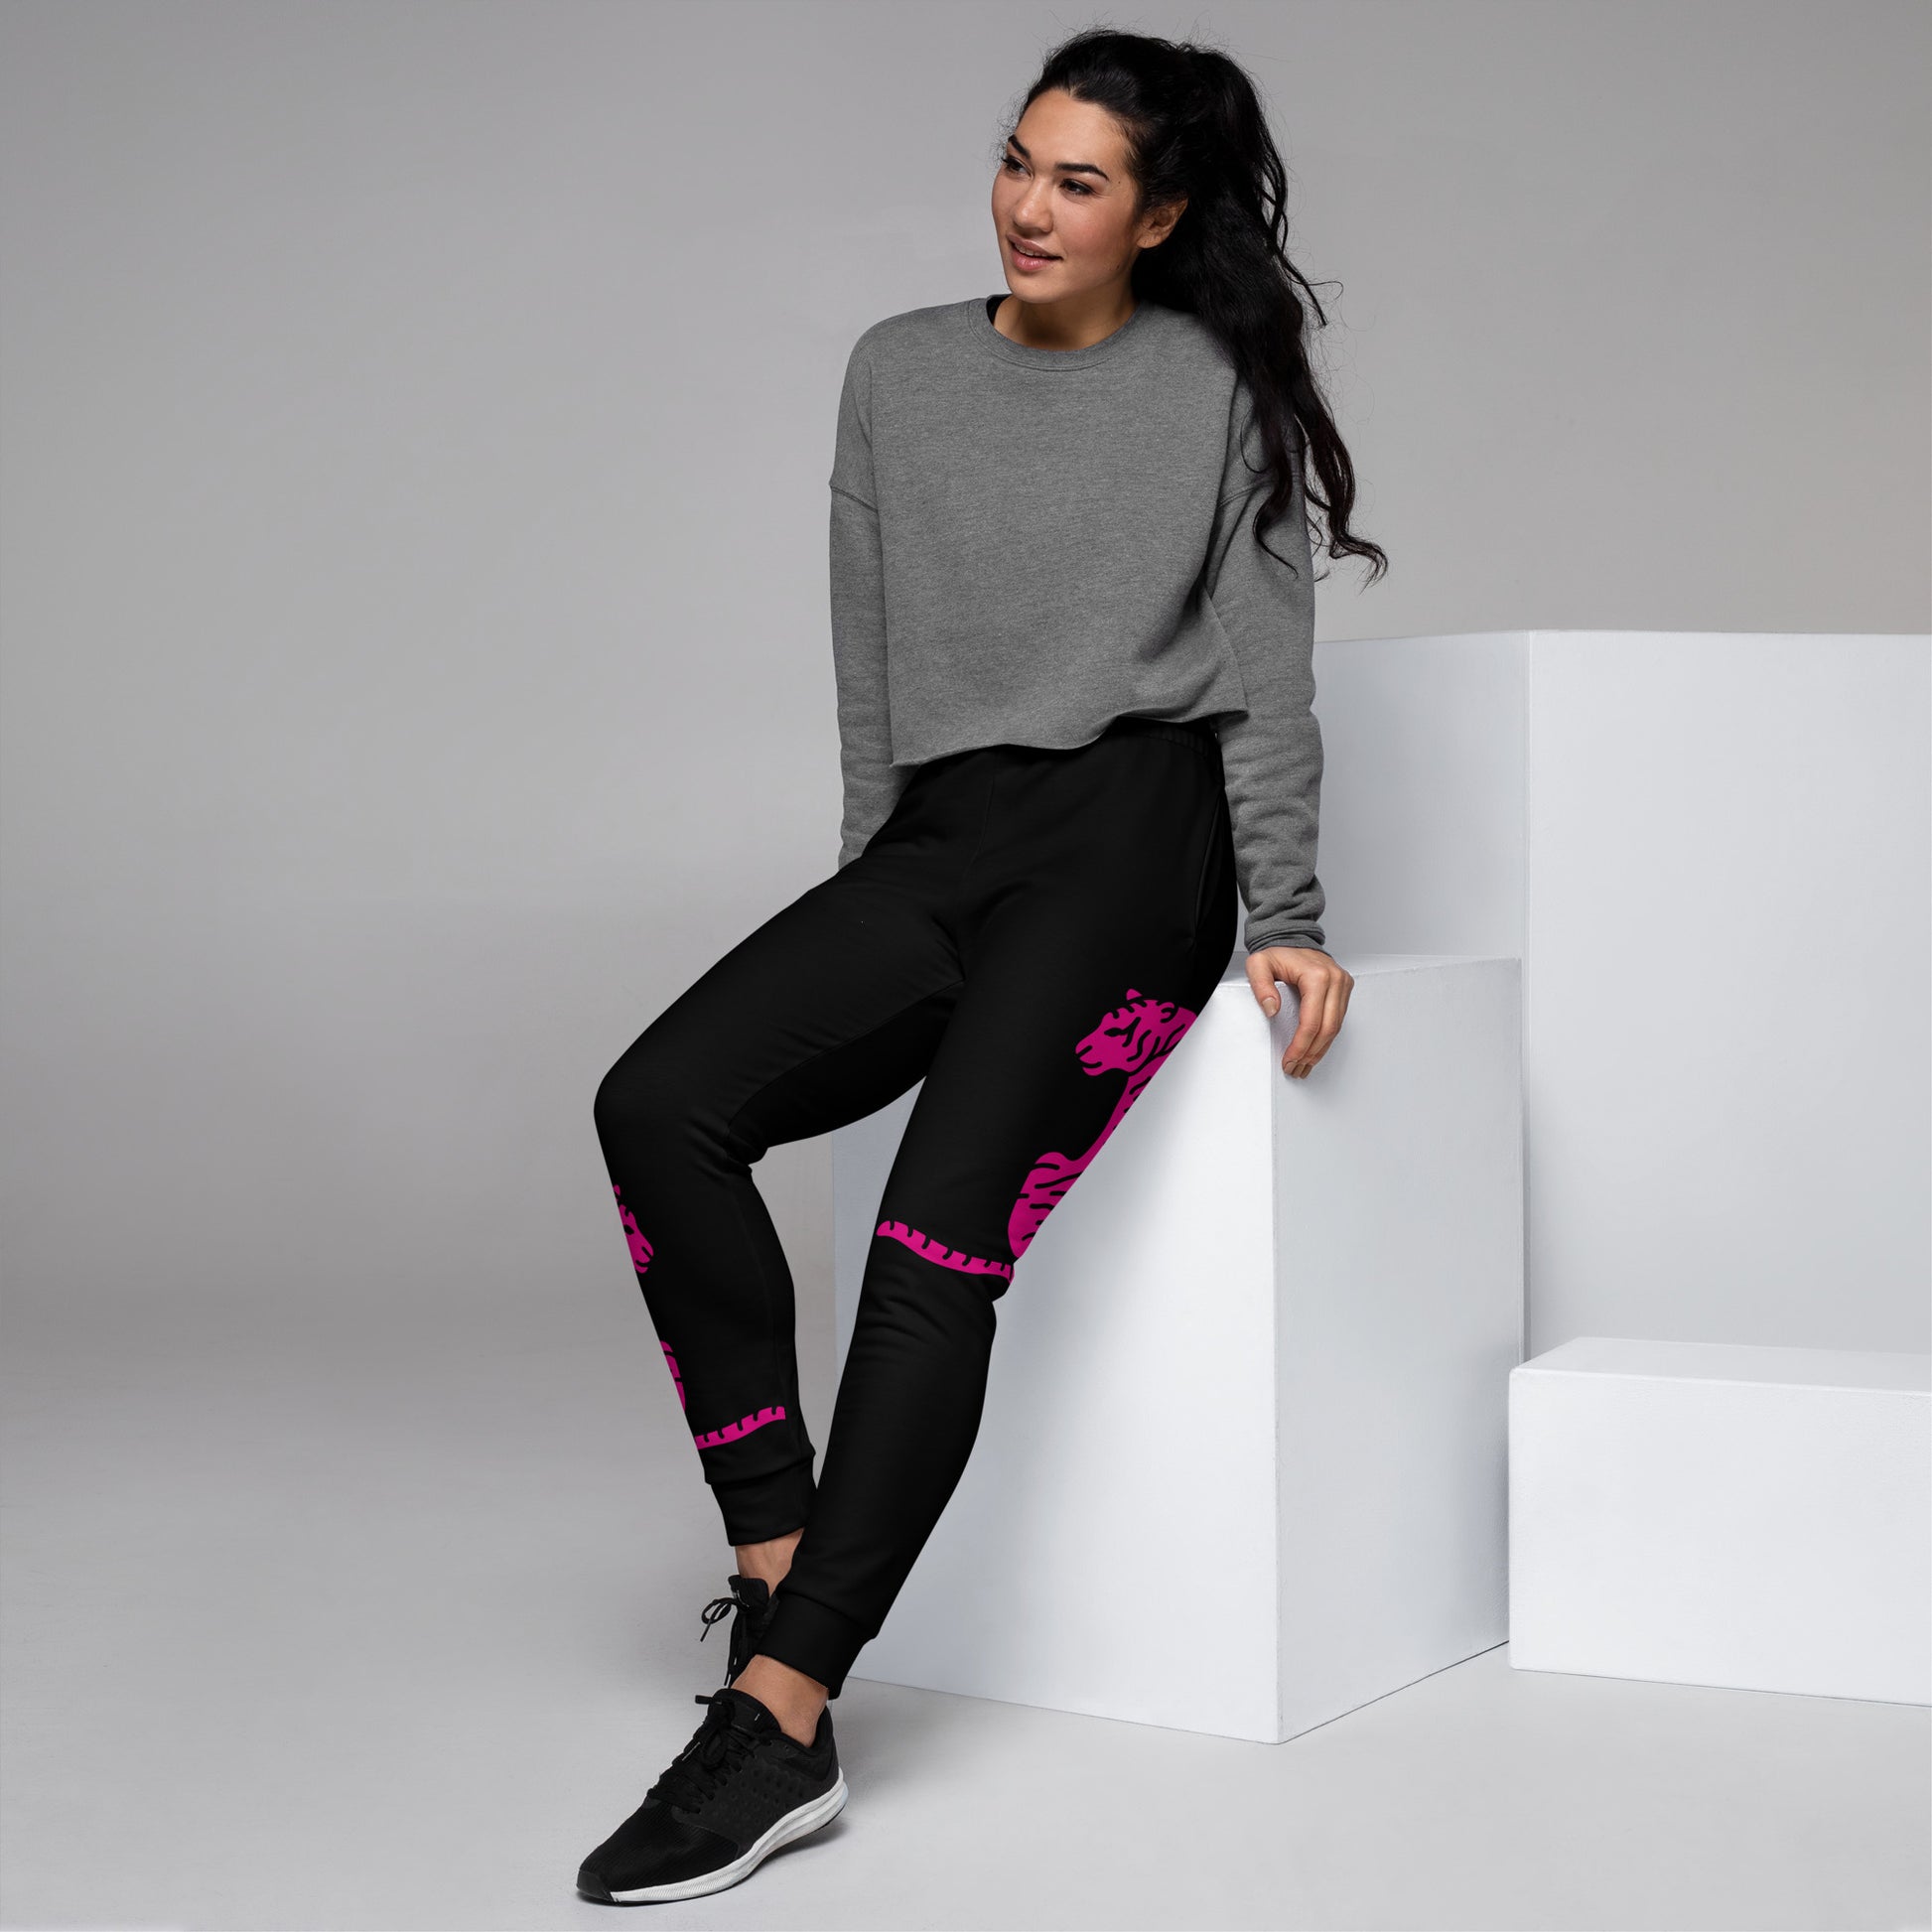 Women's Joggers Black with Hot Pink Tiger - DMD Bags